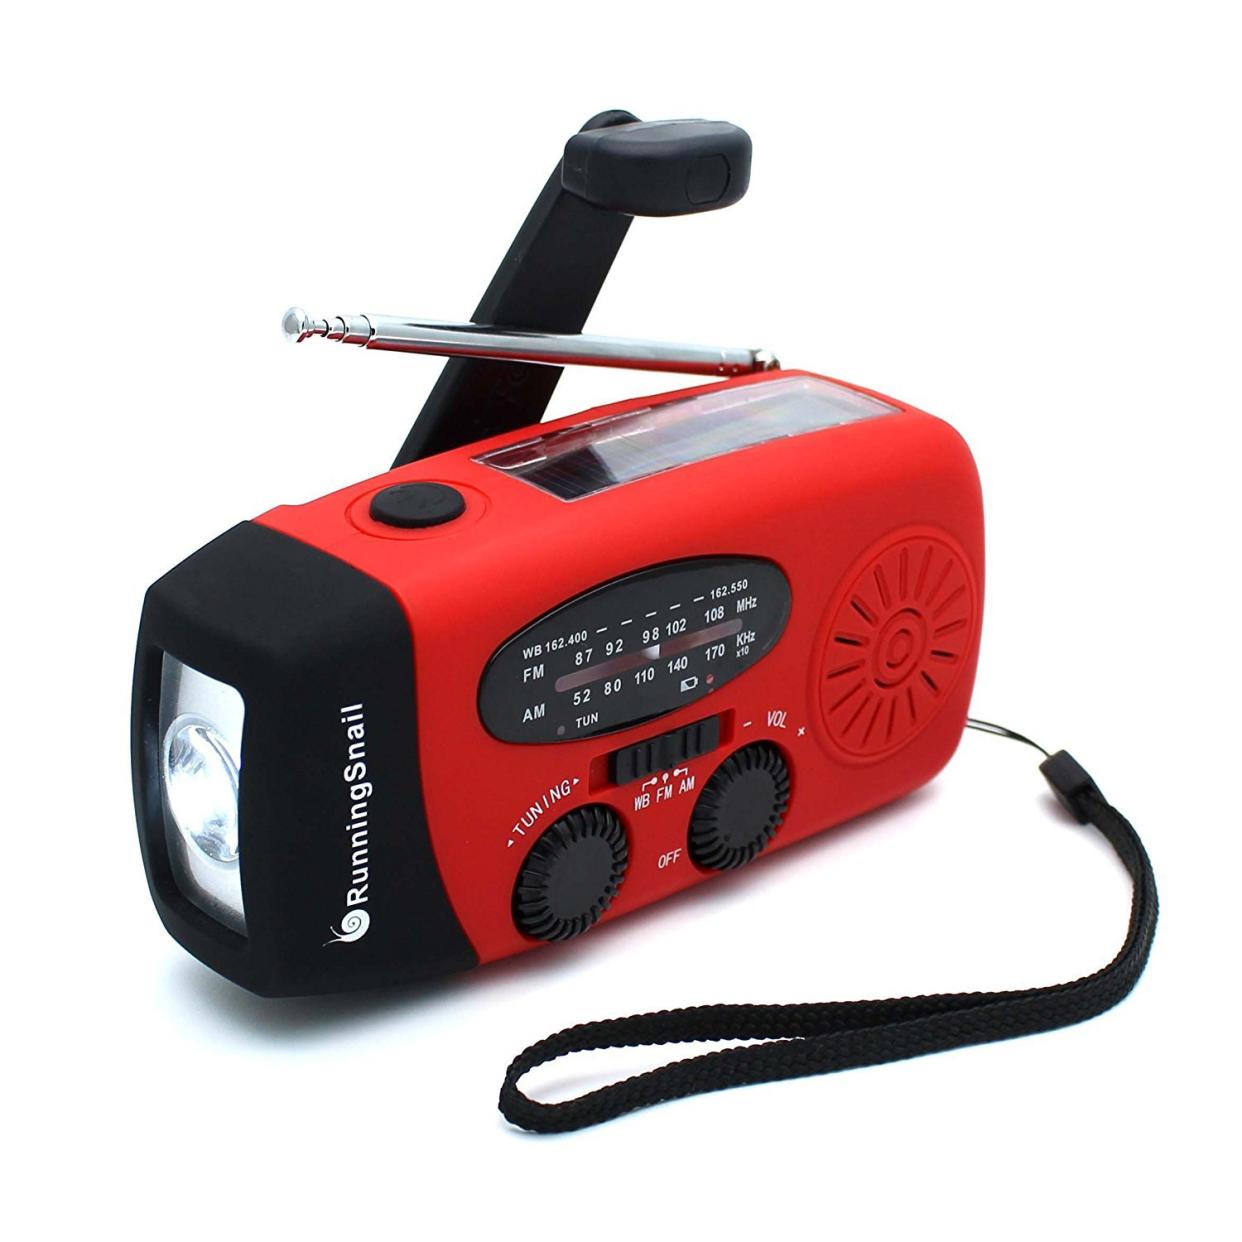 Running Snail Hand Crank Radio and Phone Charger